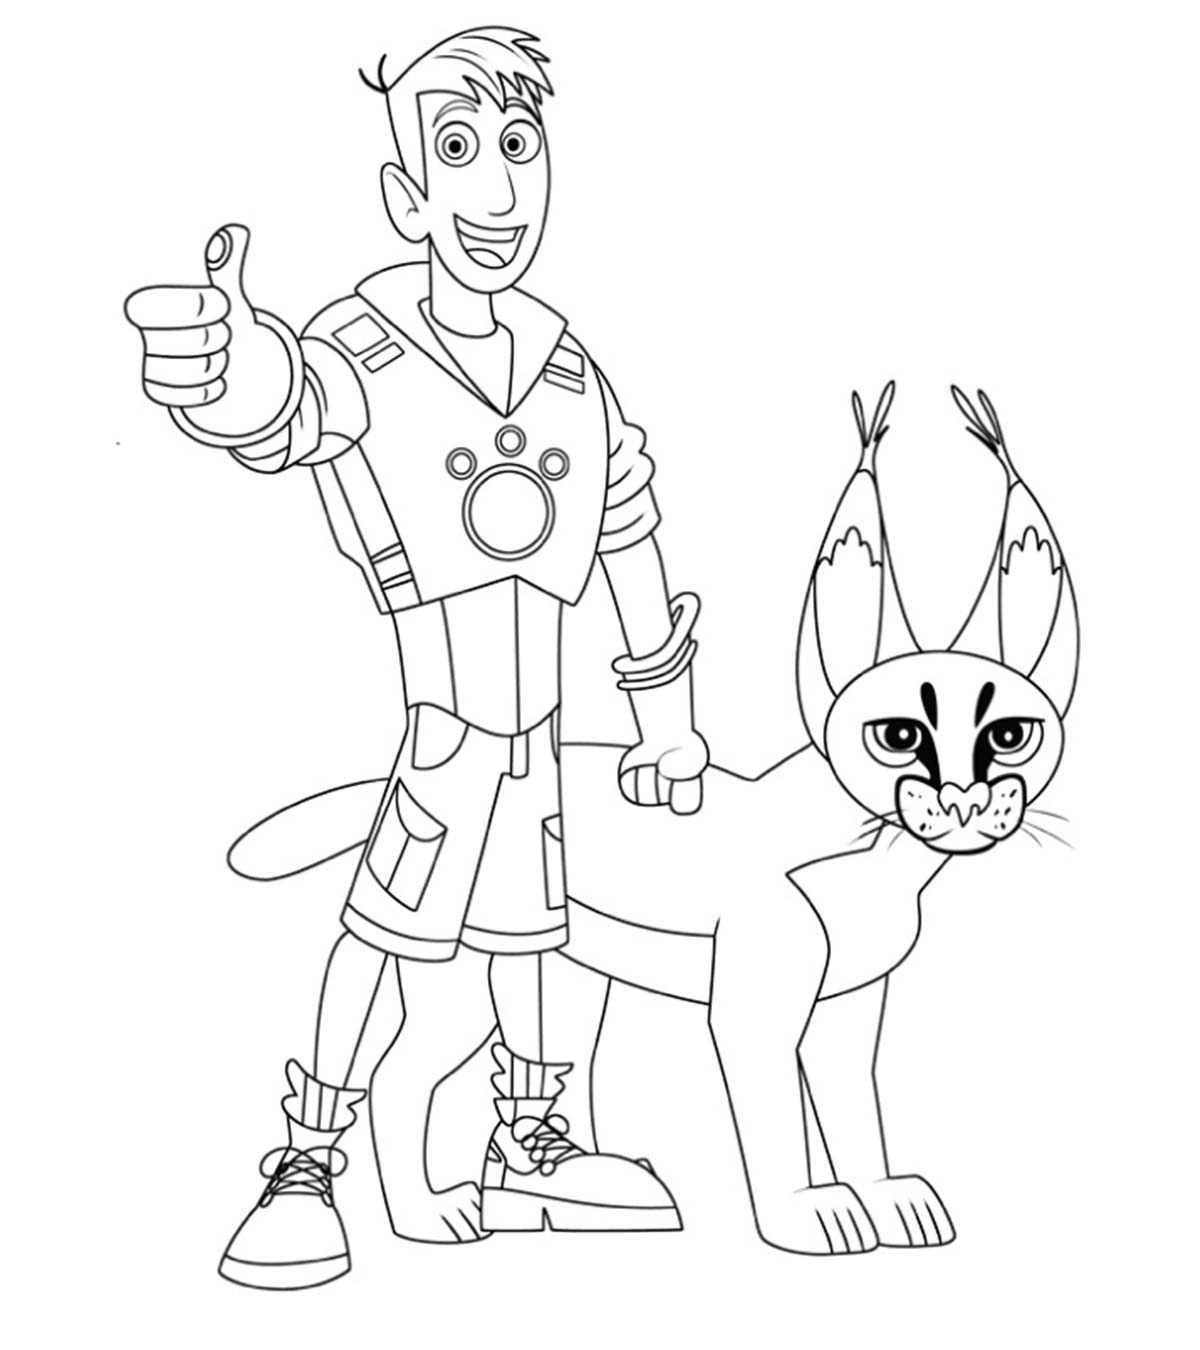 20 Best Wild Kratts Coloring Pages Your Toddler Will Love To Color_image